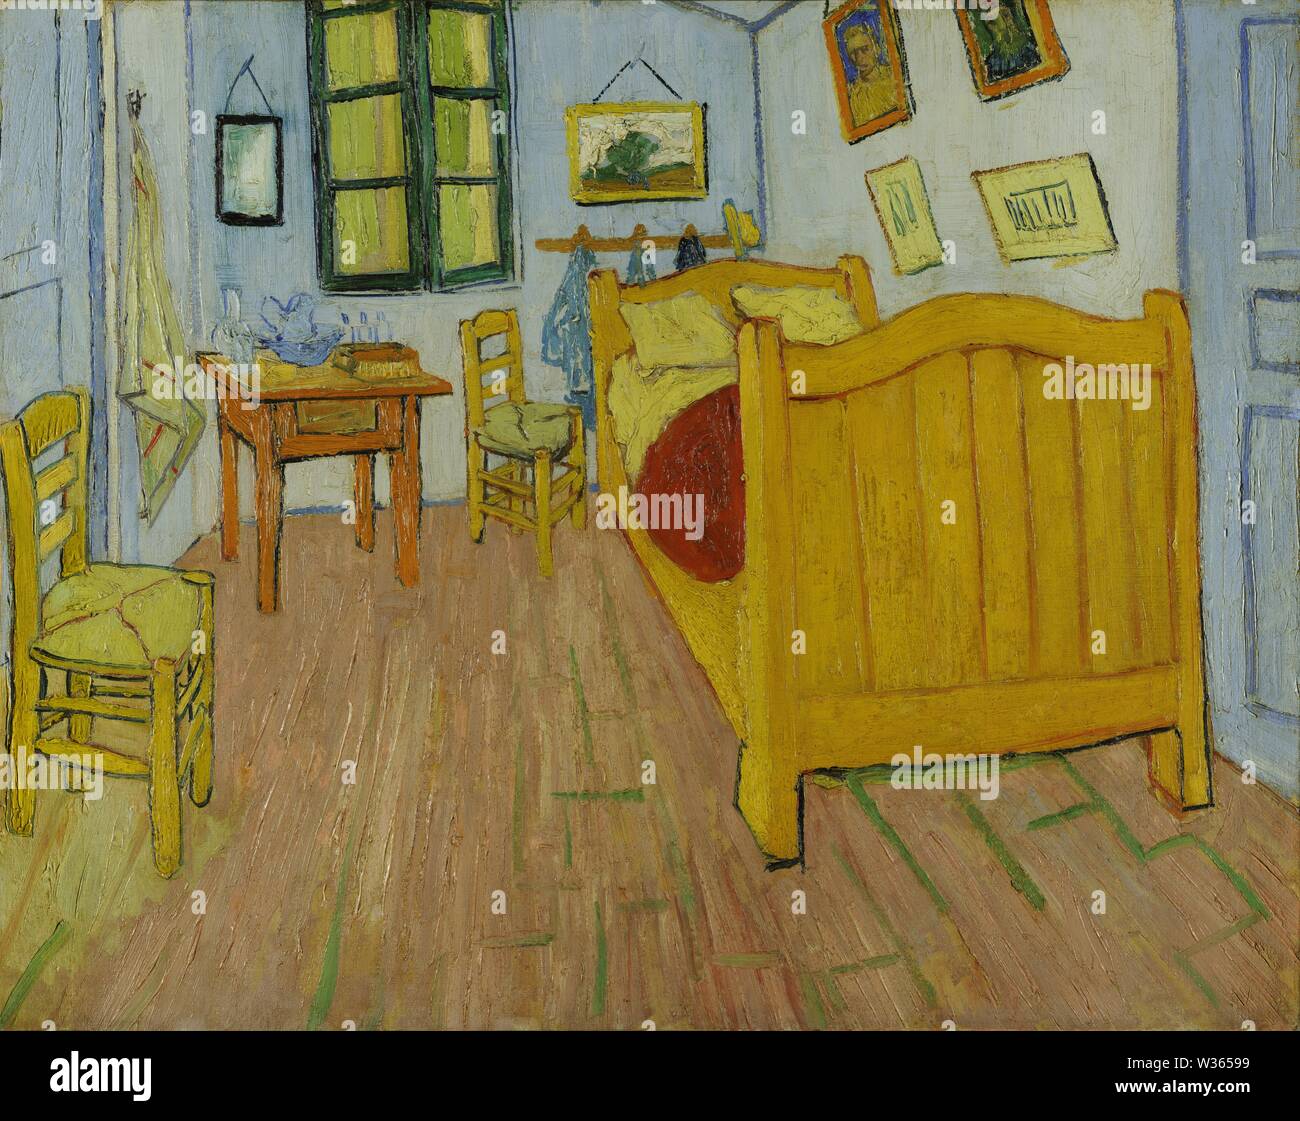 Van Gogh's Bedroom in Arles (The Bedroom), original (1st) version (October 1888) painting by Vincent van Gogh - Very high resolution and quality image Stock Photo